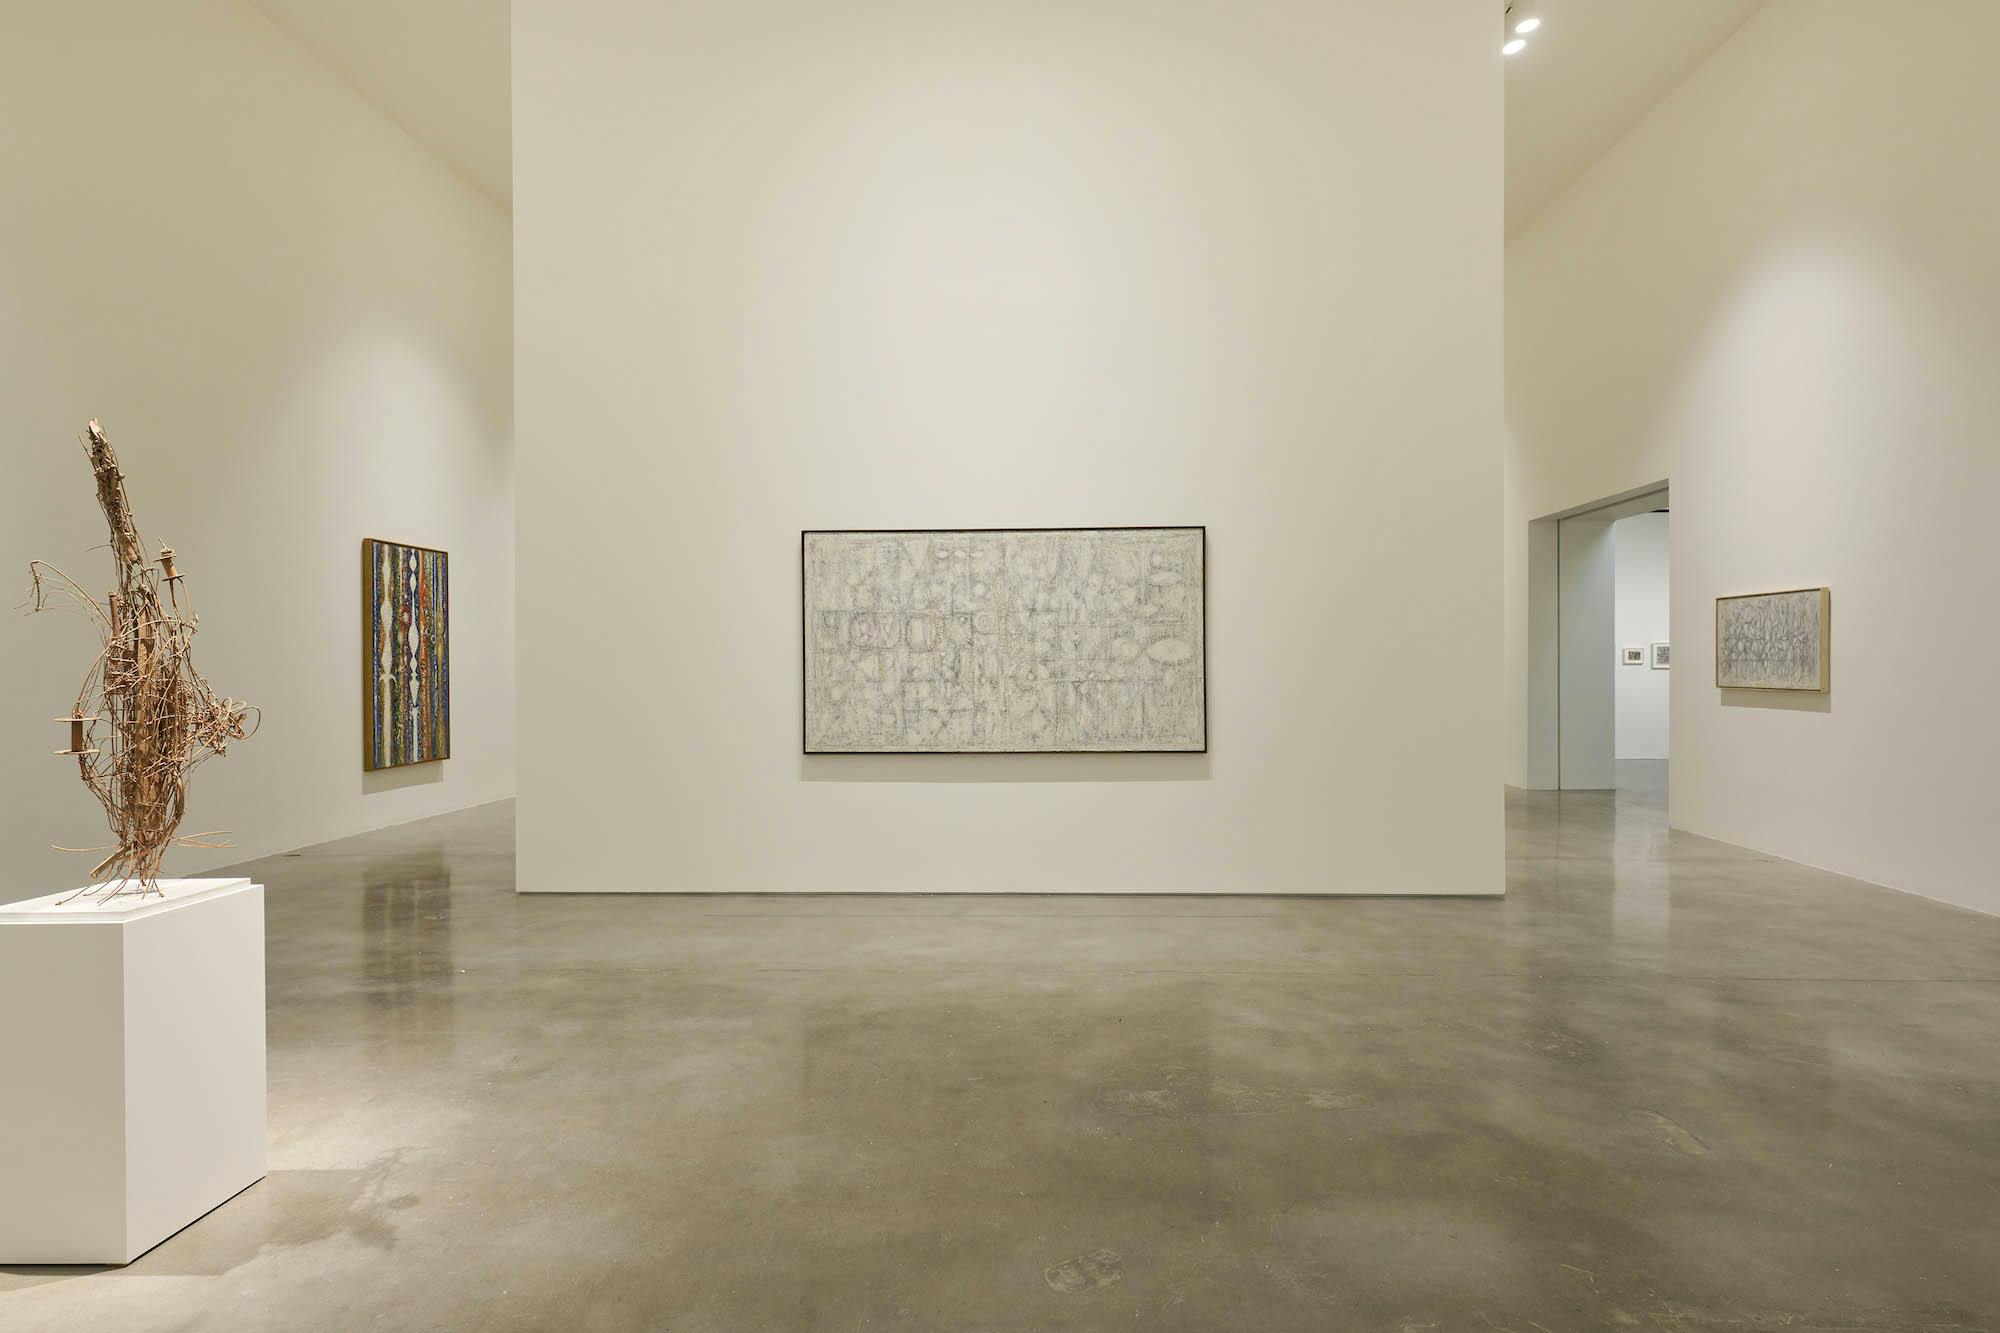 Installation view, Richard Pousette-Dart: Spirit and Substance, Pace Gallery, New York, NY, 2022.